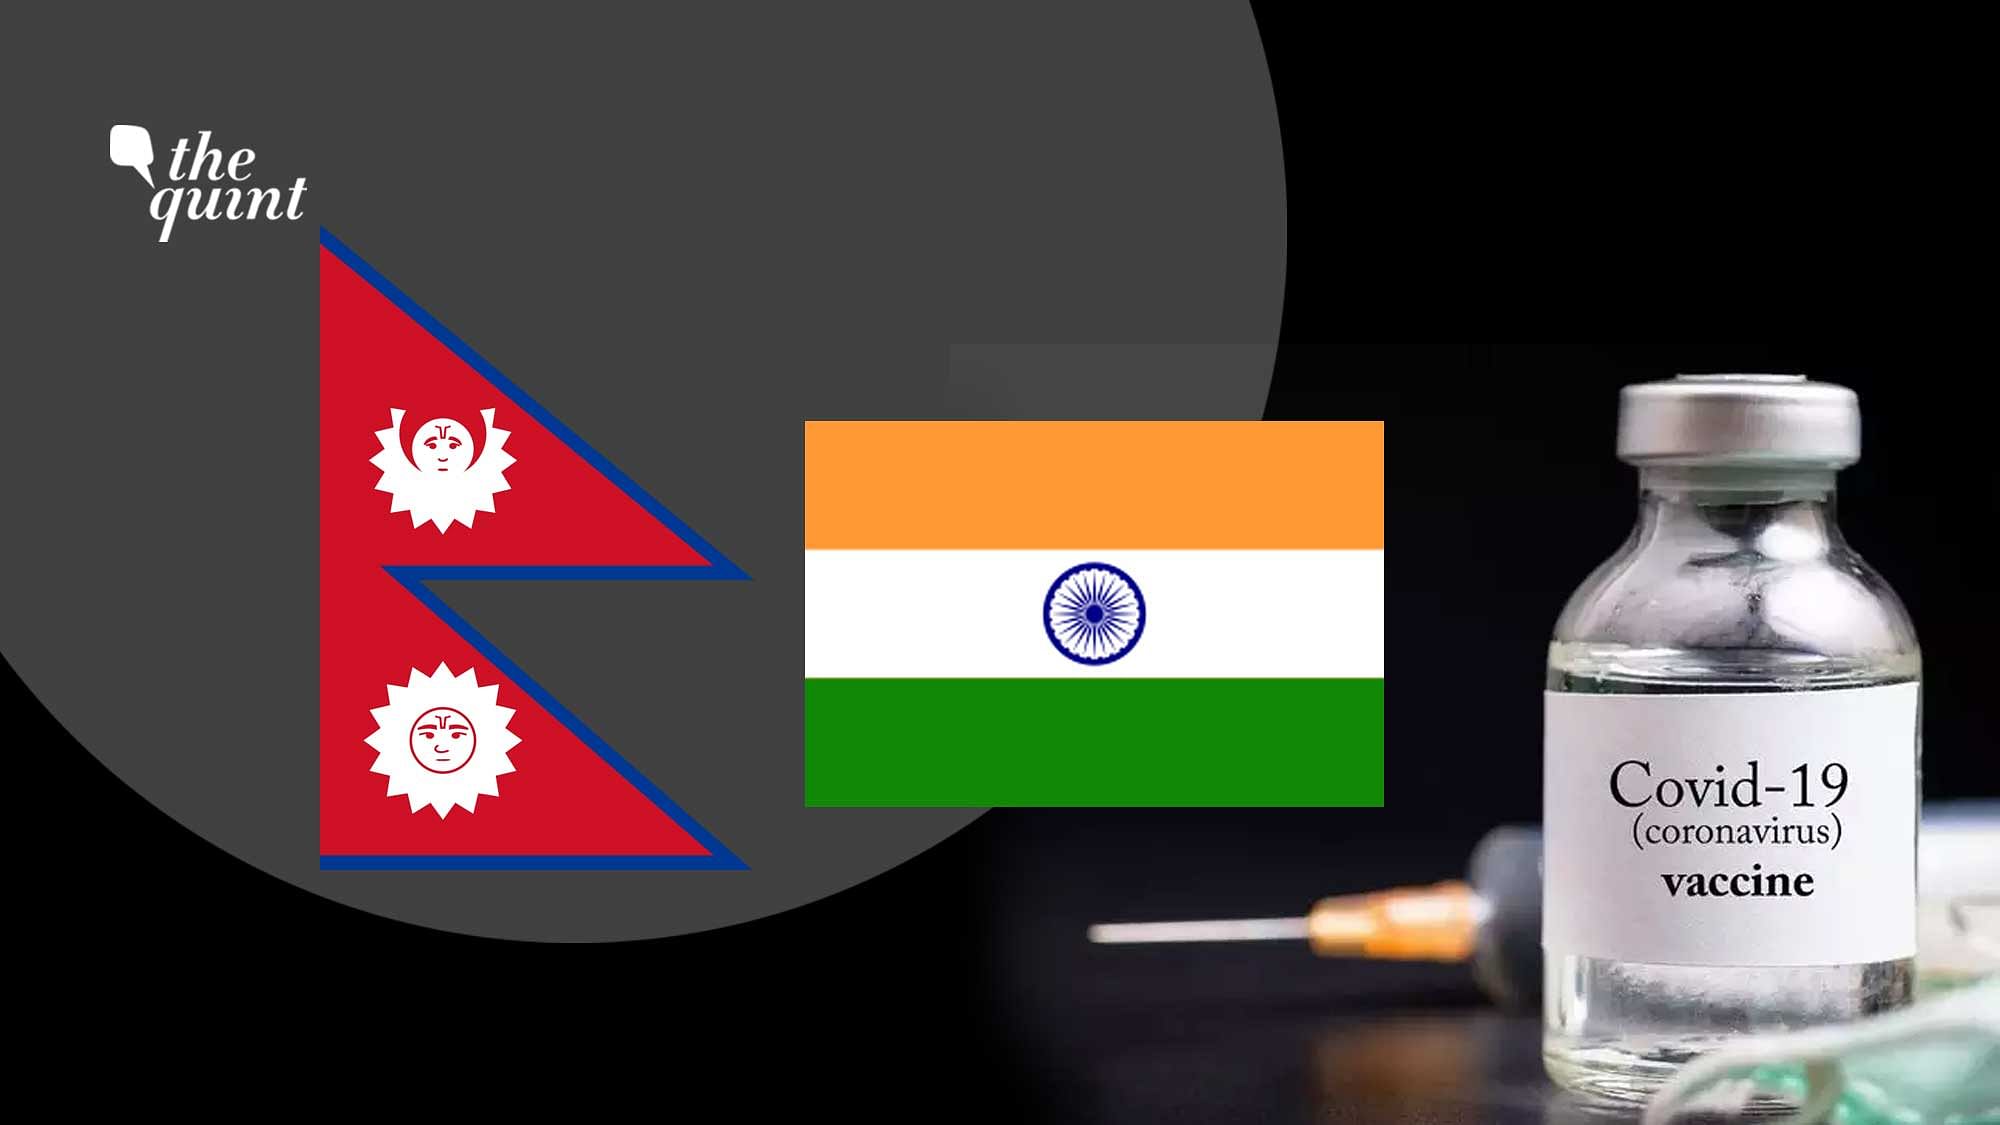 Image of India and Nepal’s flags used for representational purposes.